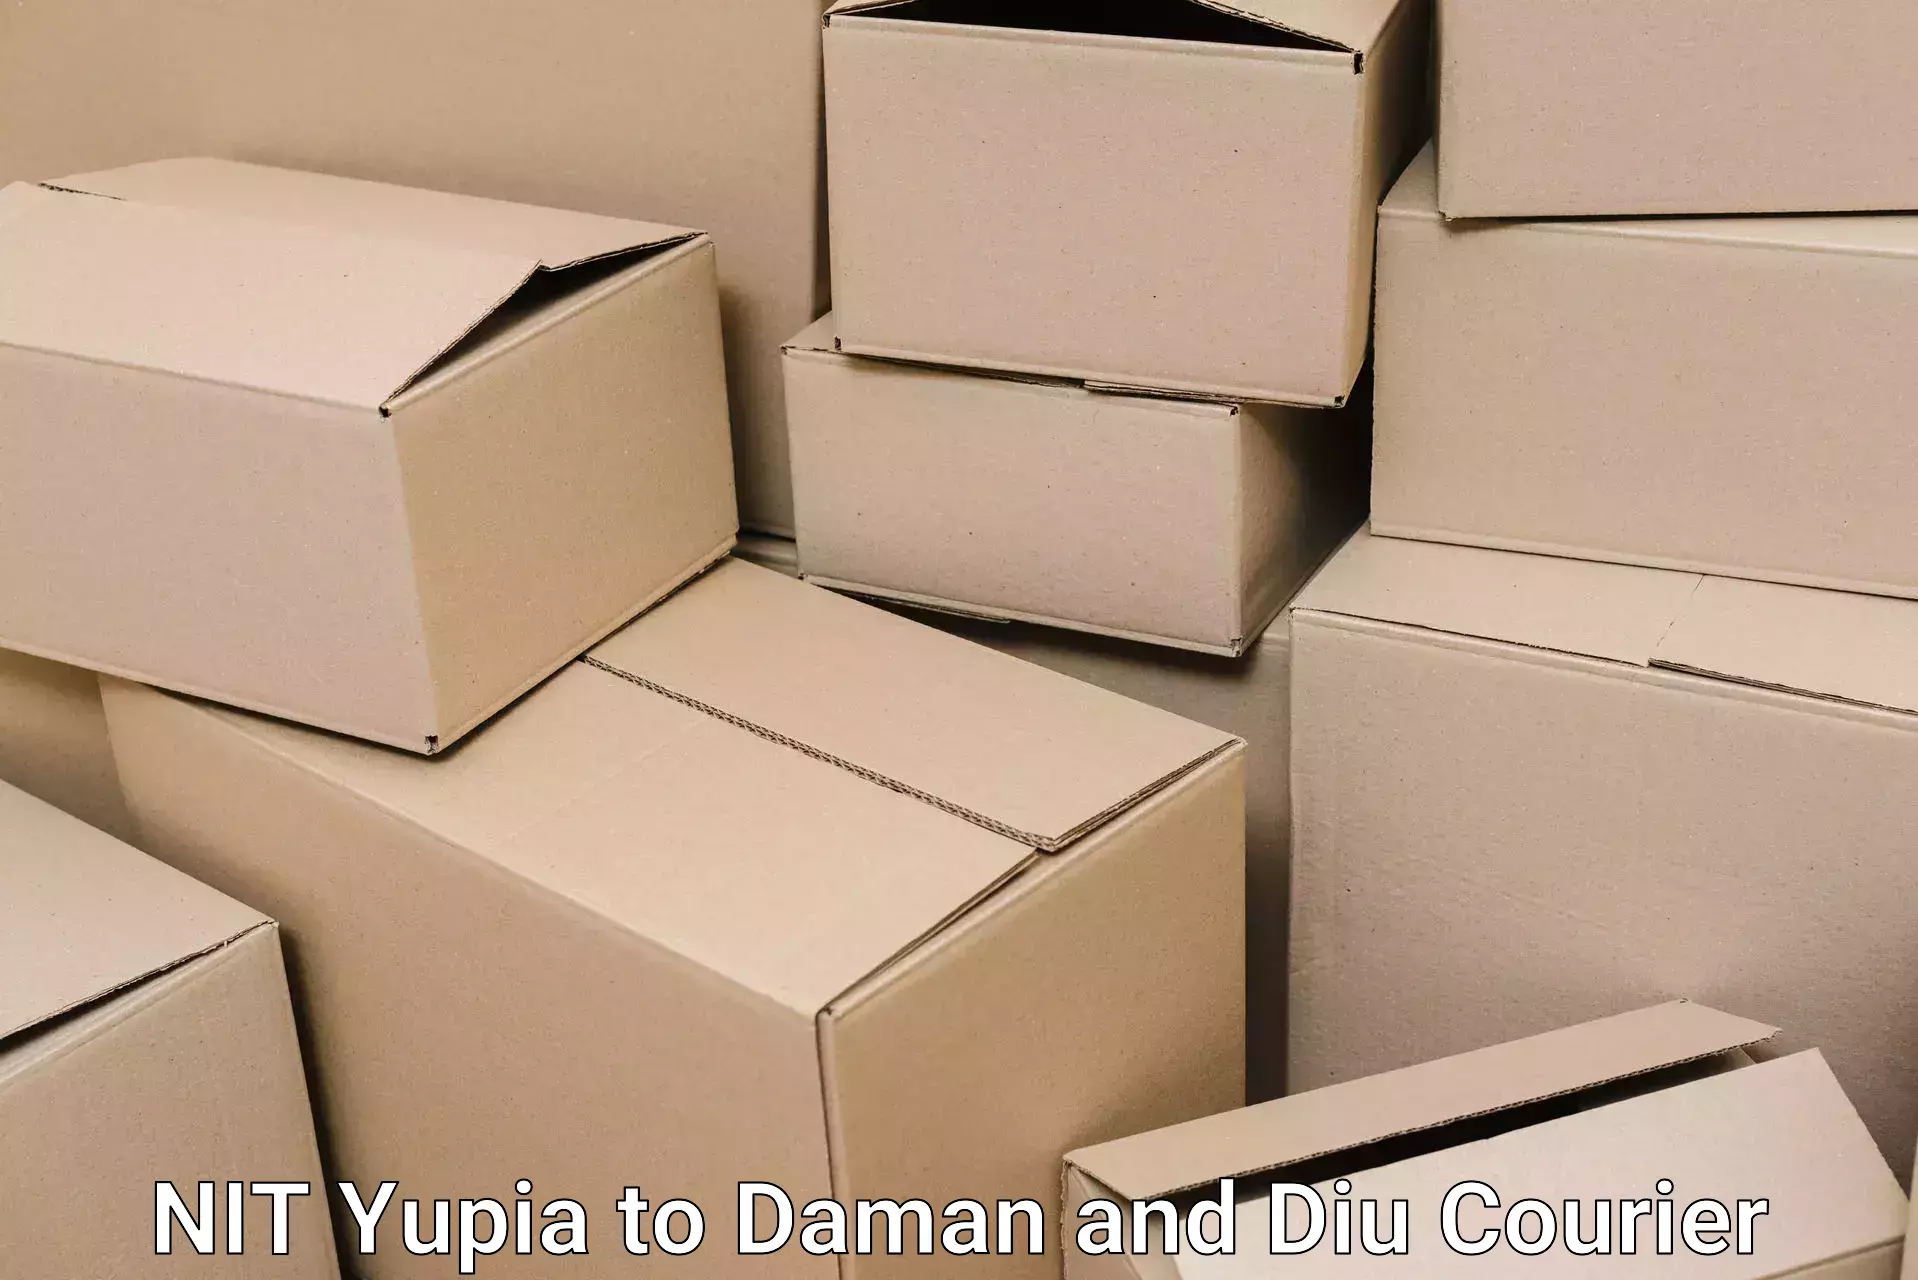 Trusted relocation experts NIT Yupia to Daman